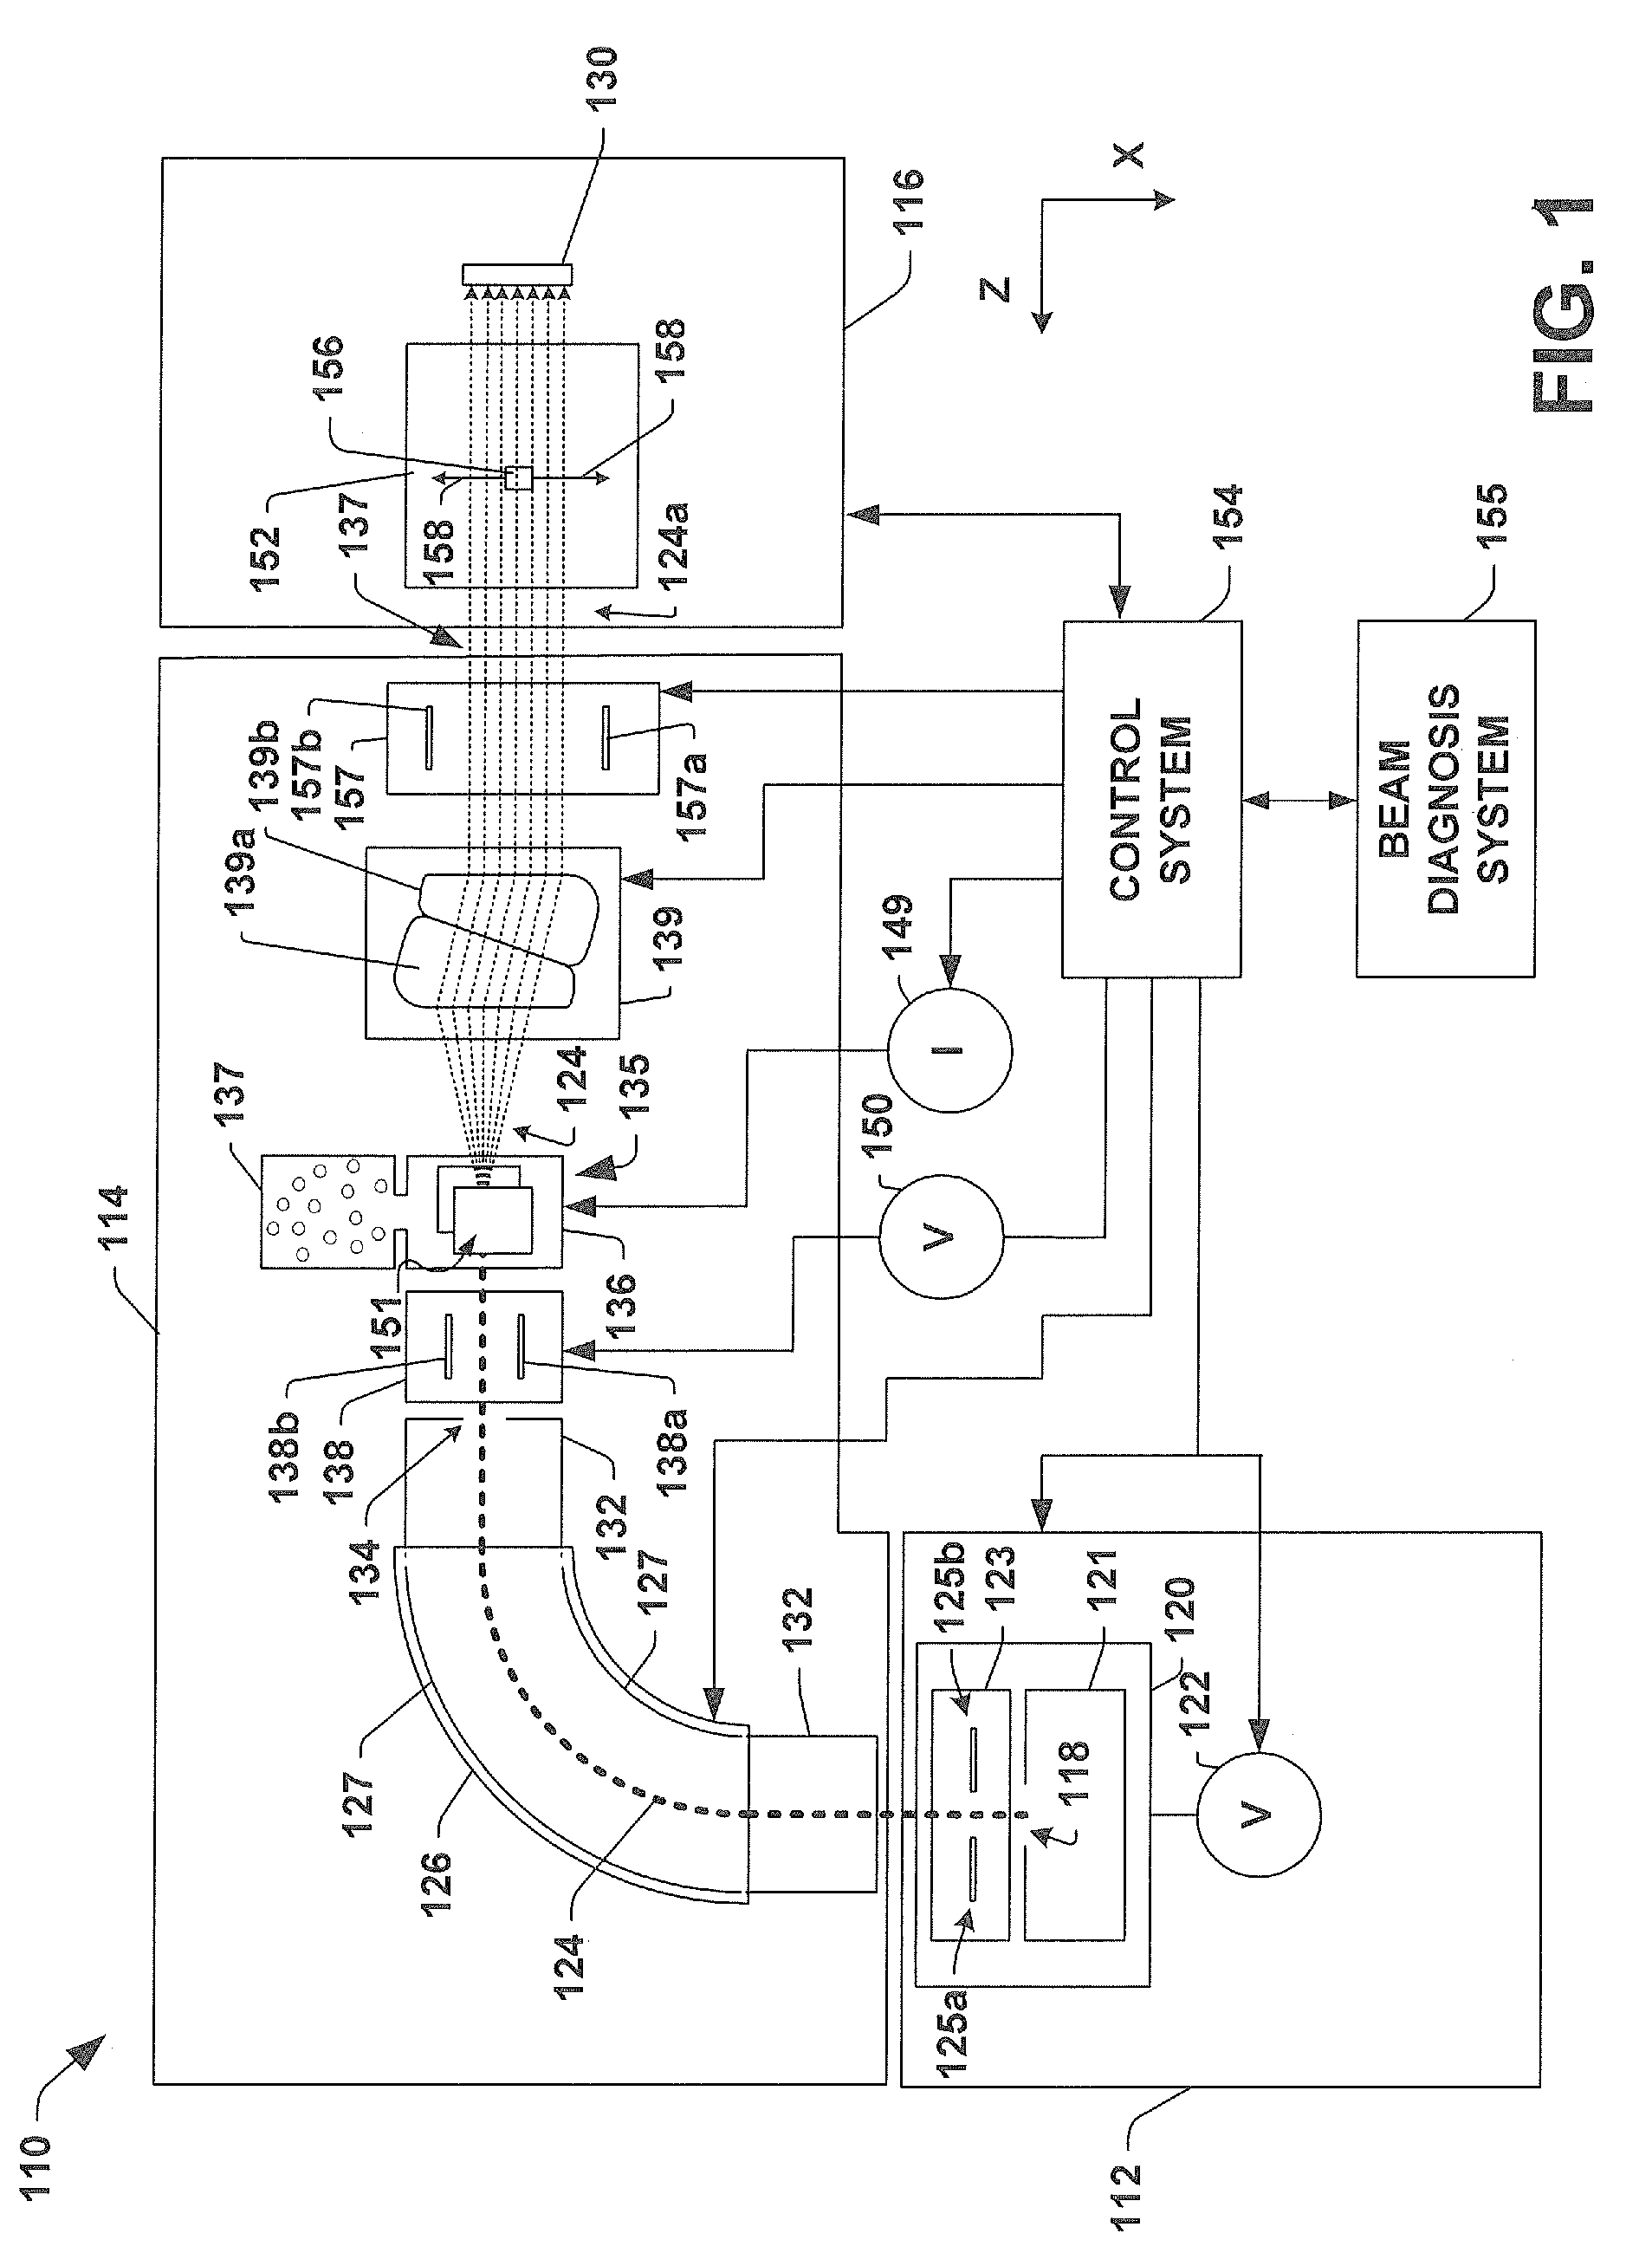 System and Method for Ion Implantation with Improved Productivity and Uniformity